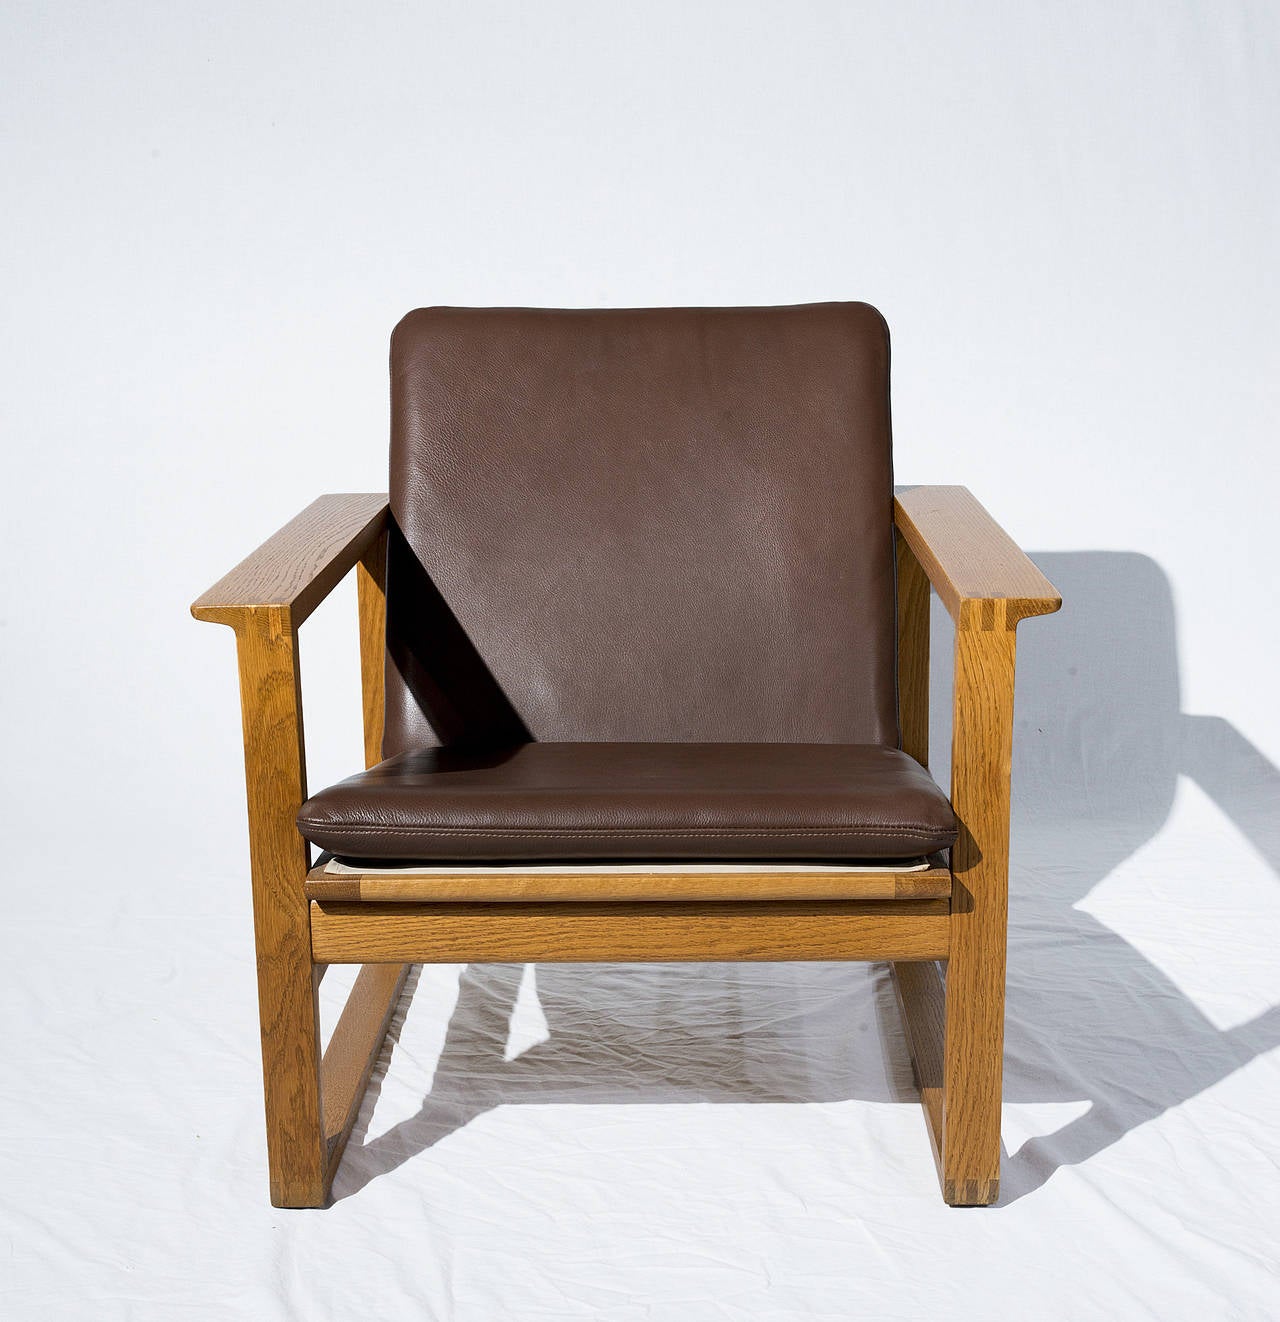 Børge Mogensen lounge chair designed in 1956 and produced by Fredericia Stolefabrik.  Store formerly known as ARTFUL DODGER INC